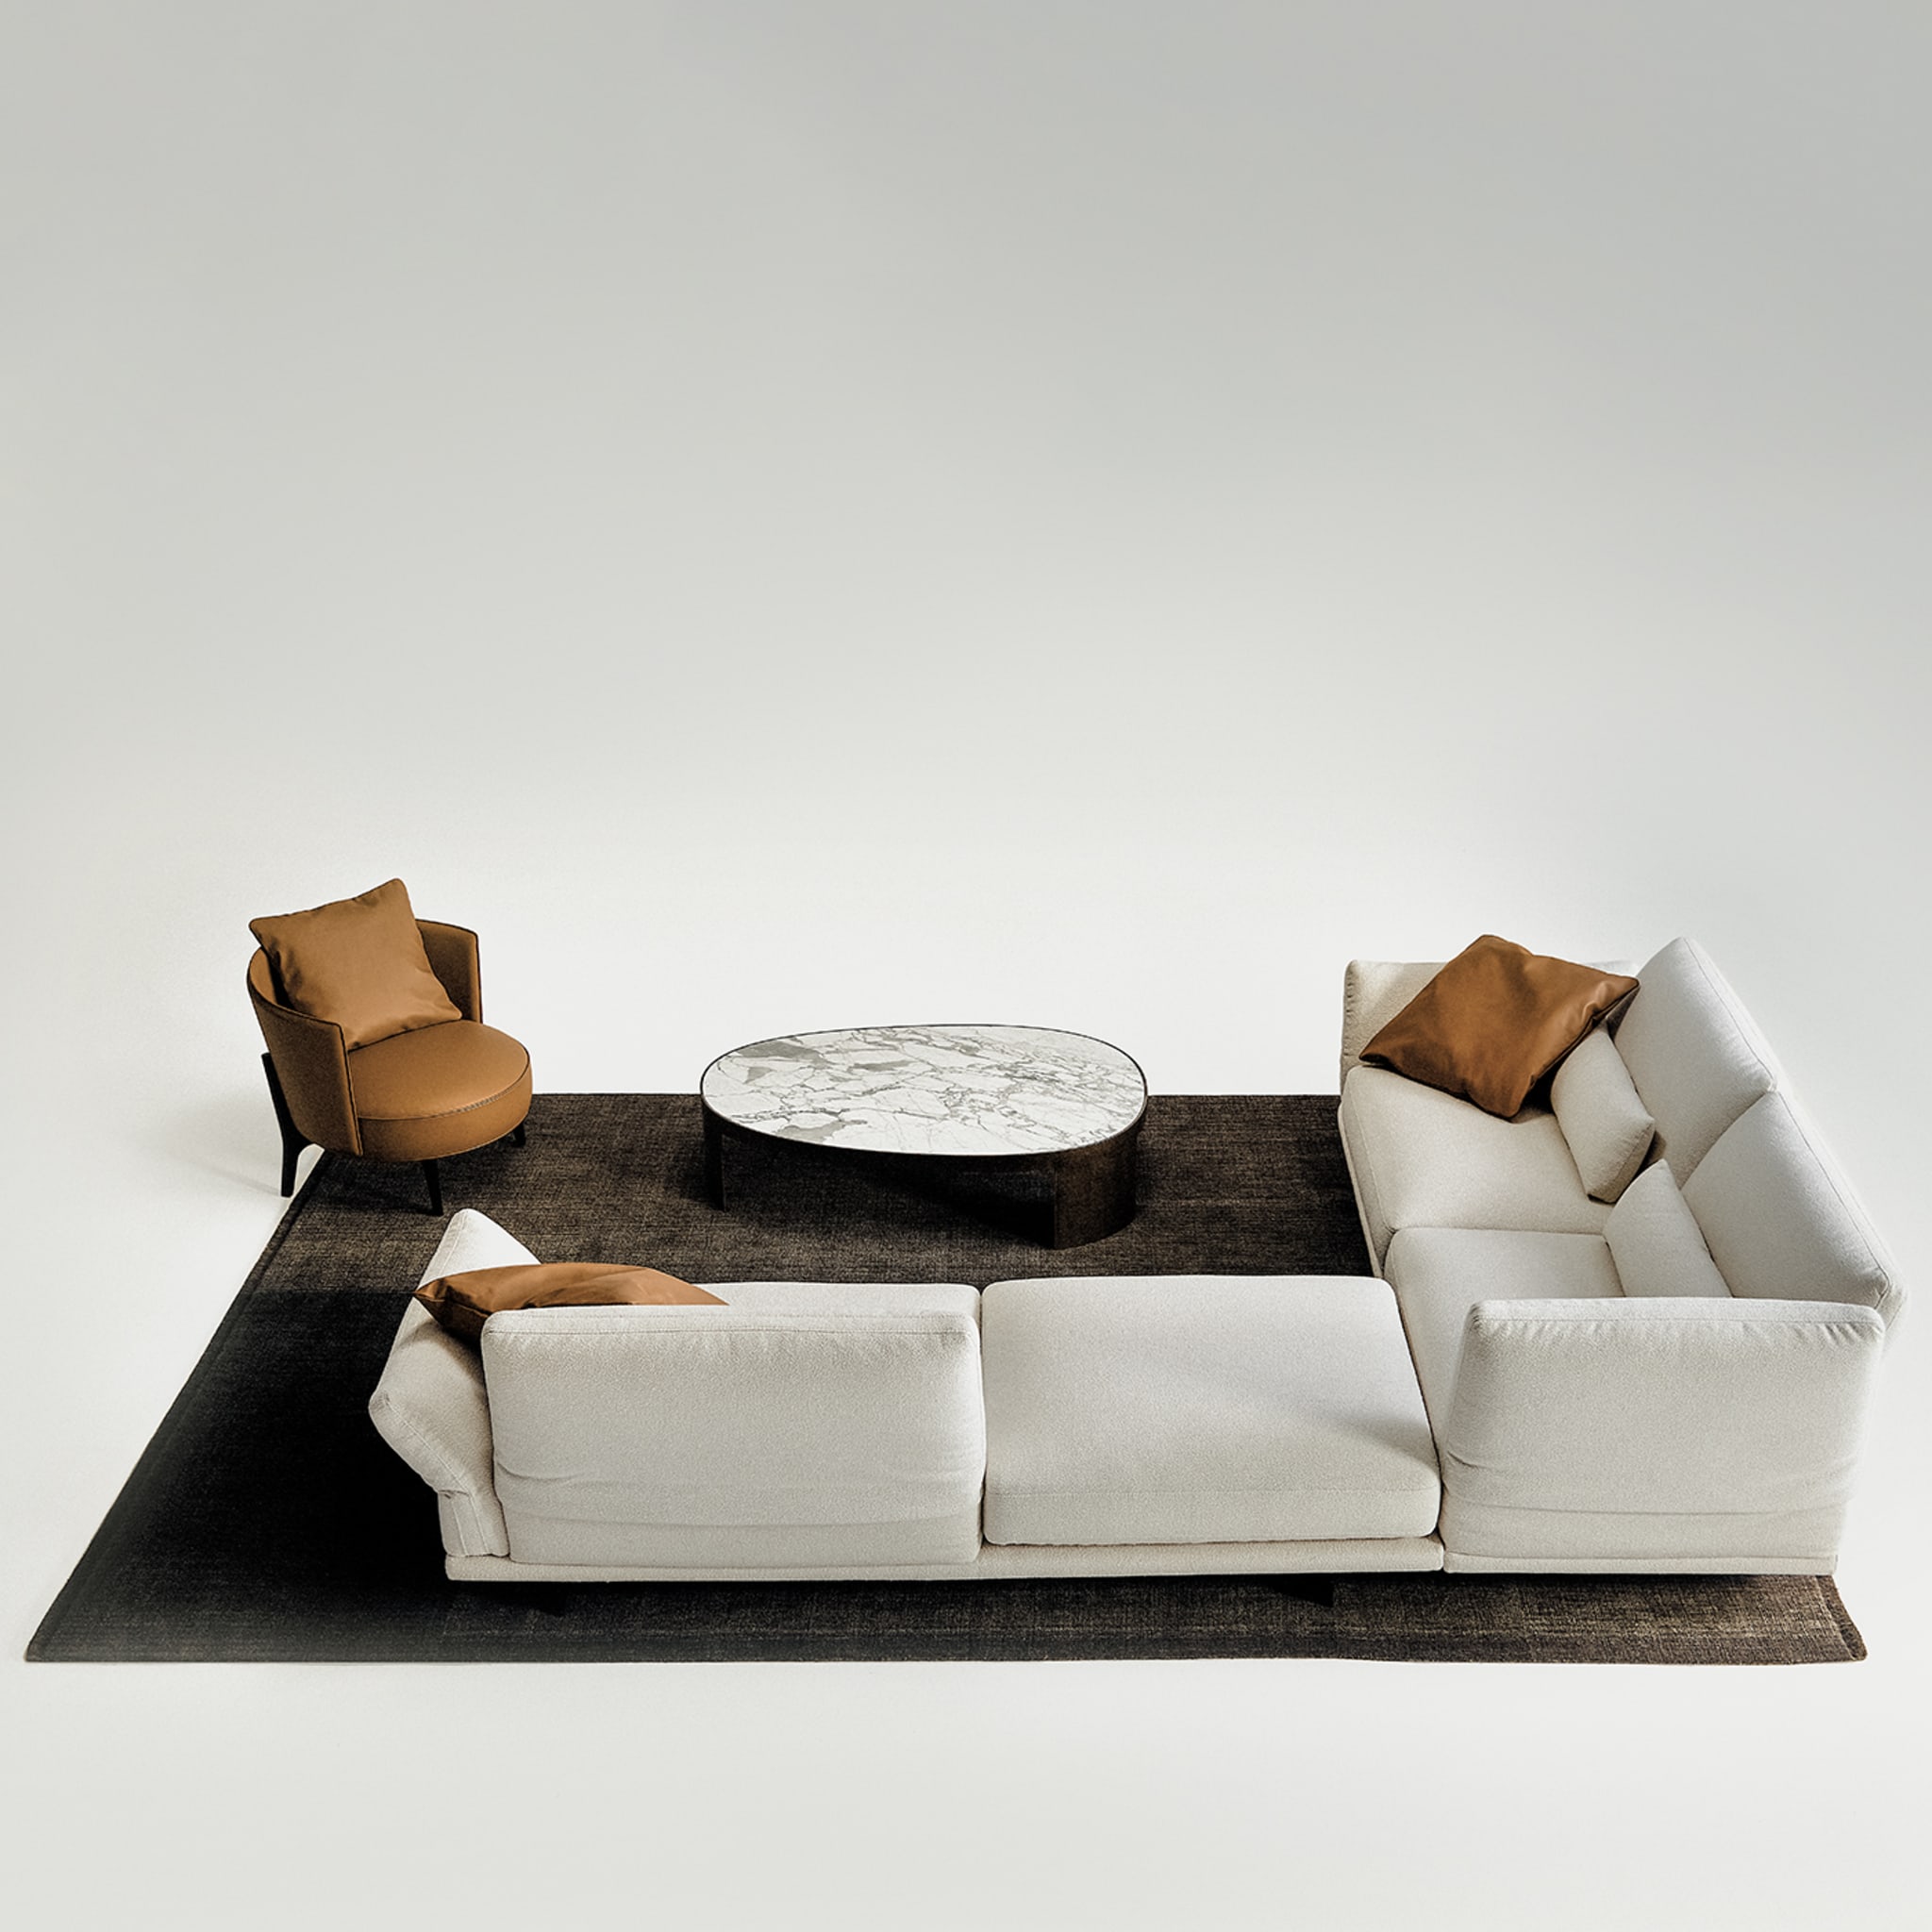 Ares 104 Brown & Black Armchair by Ludovica + Roberto Palomba - Alternative view 3